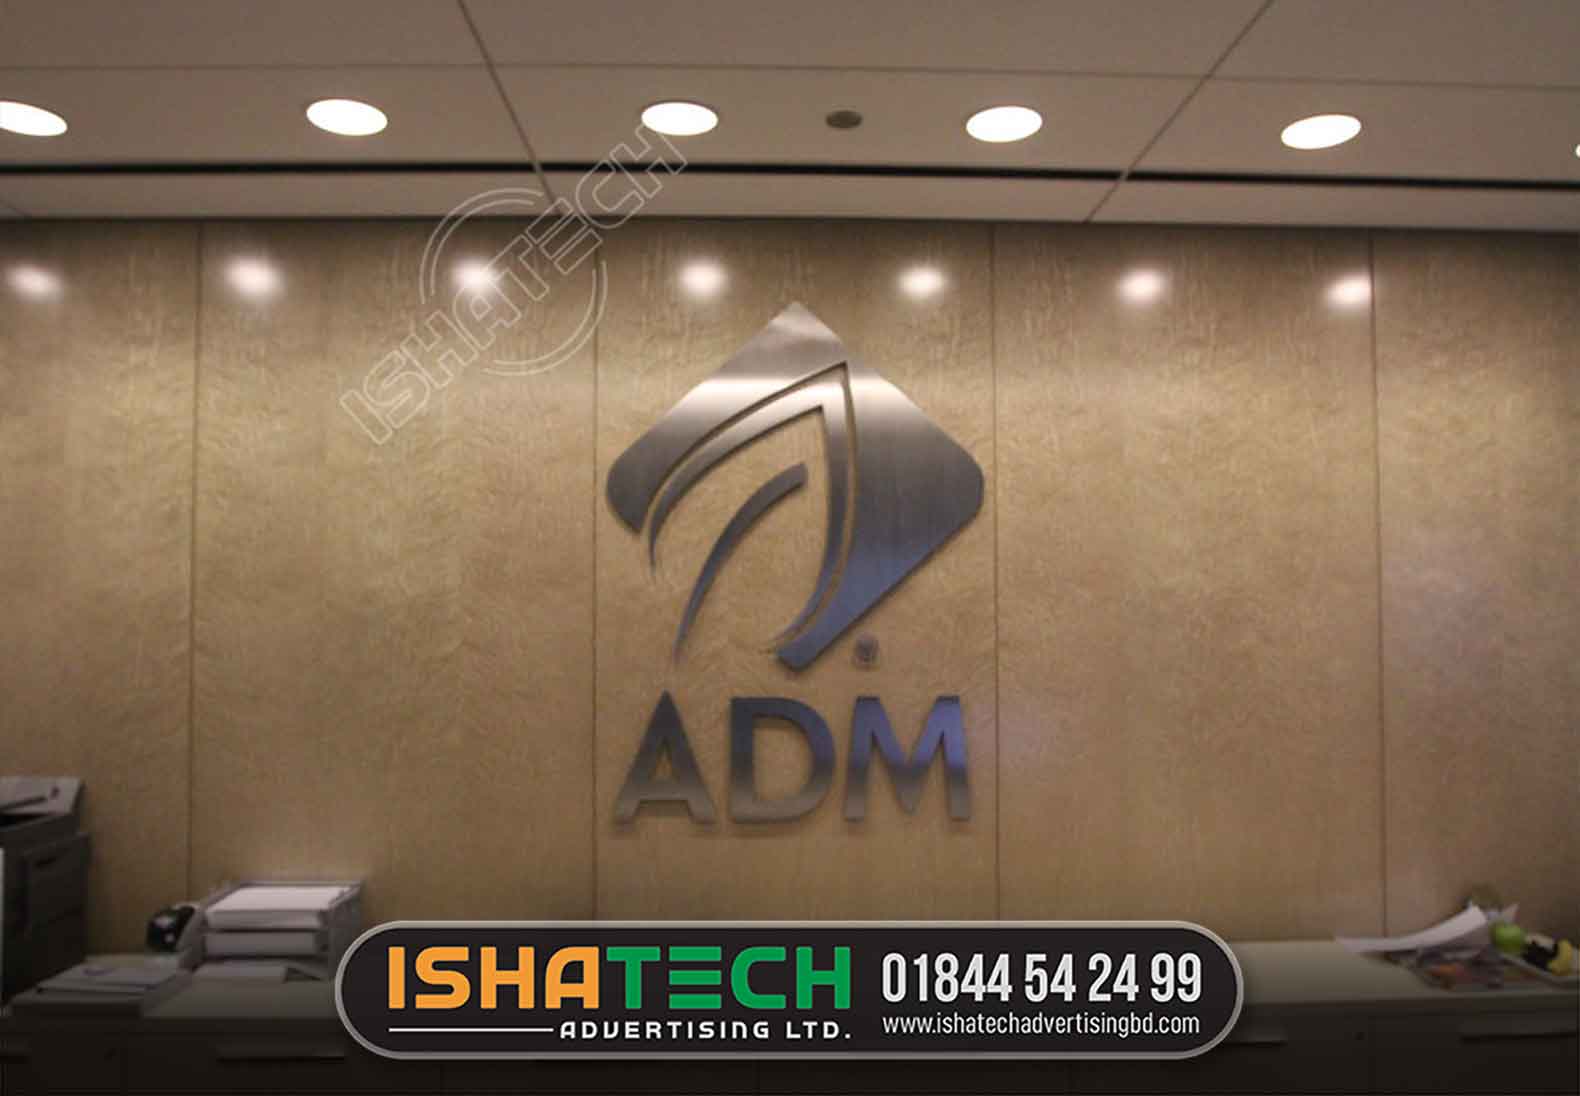 ADM OFFICE RECEPTION AREA SS LETTER AND LOGO SIGNAGE MAKING BD, Stainless Steel Letters' Signboard Manufacturer | মিরপুর